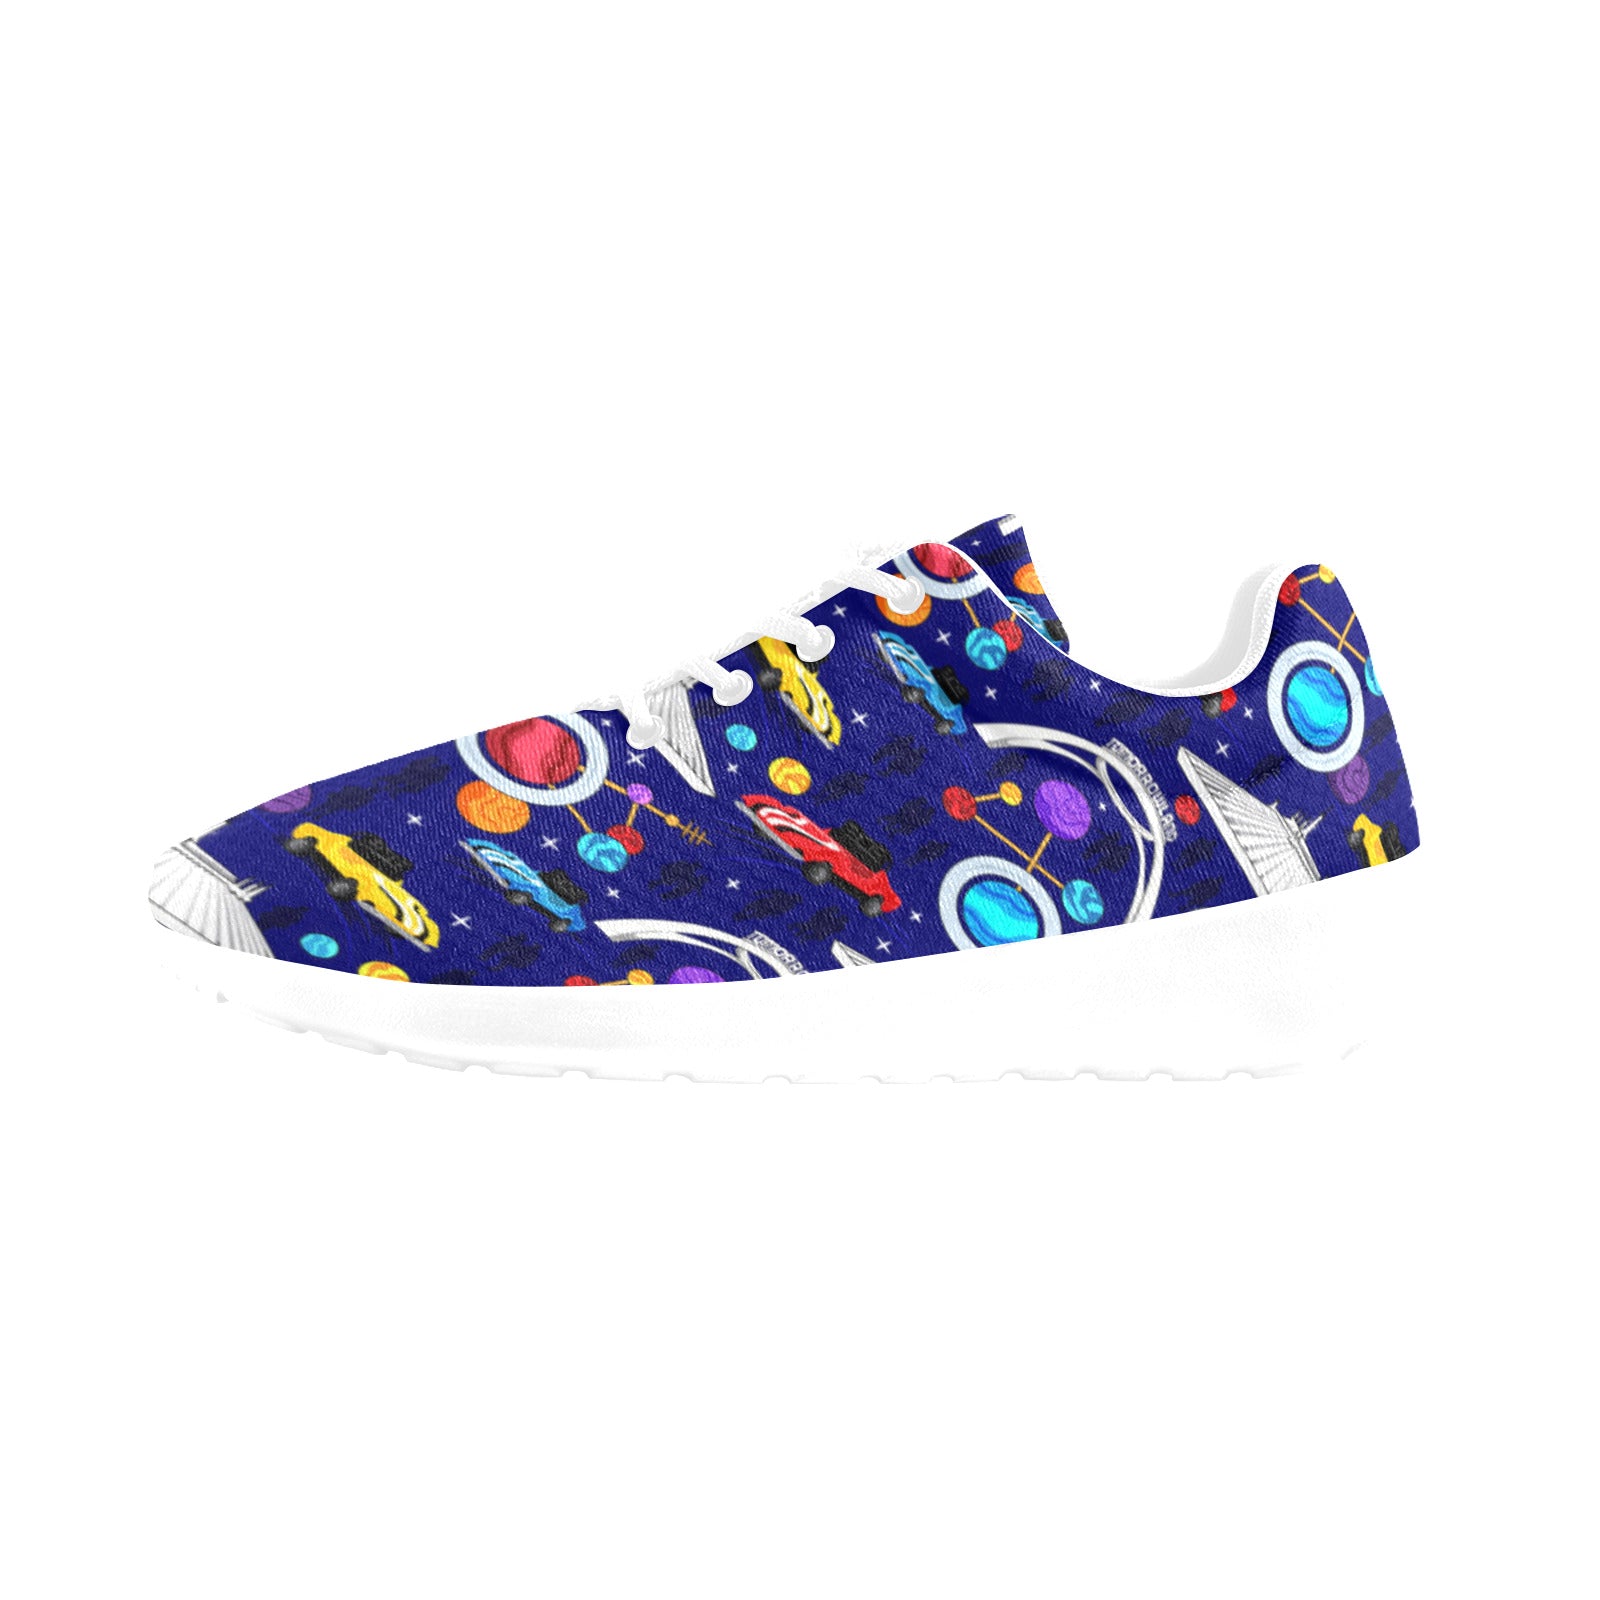 Tomorrowland Men's Athletic Shoes - Ambrie